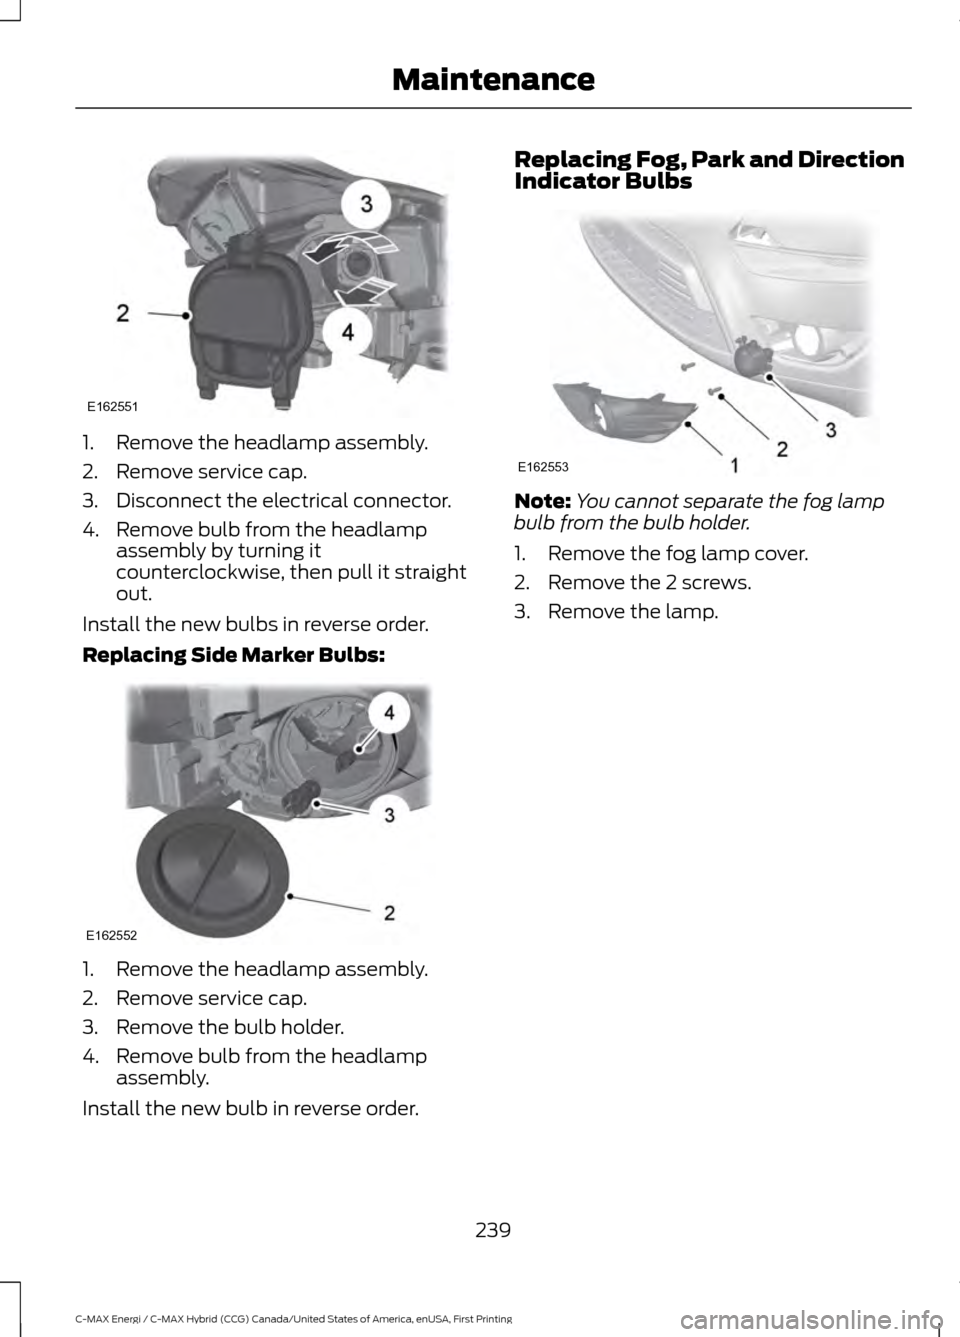 FORD C MAX HYBRID 2017 2.G Owners Manual 1. Remove the headlamp assembly.
2. Remove service cap.
3. Disconnect the electrical connector.
4. Remove bulb from the headlamp
assembly by turning it
counterclockwise, then pull it straight
out.
Ins